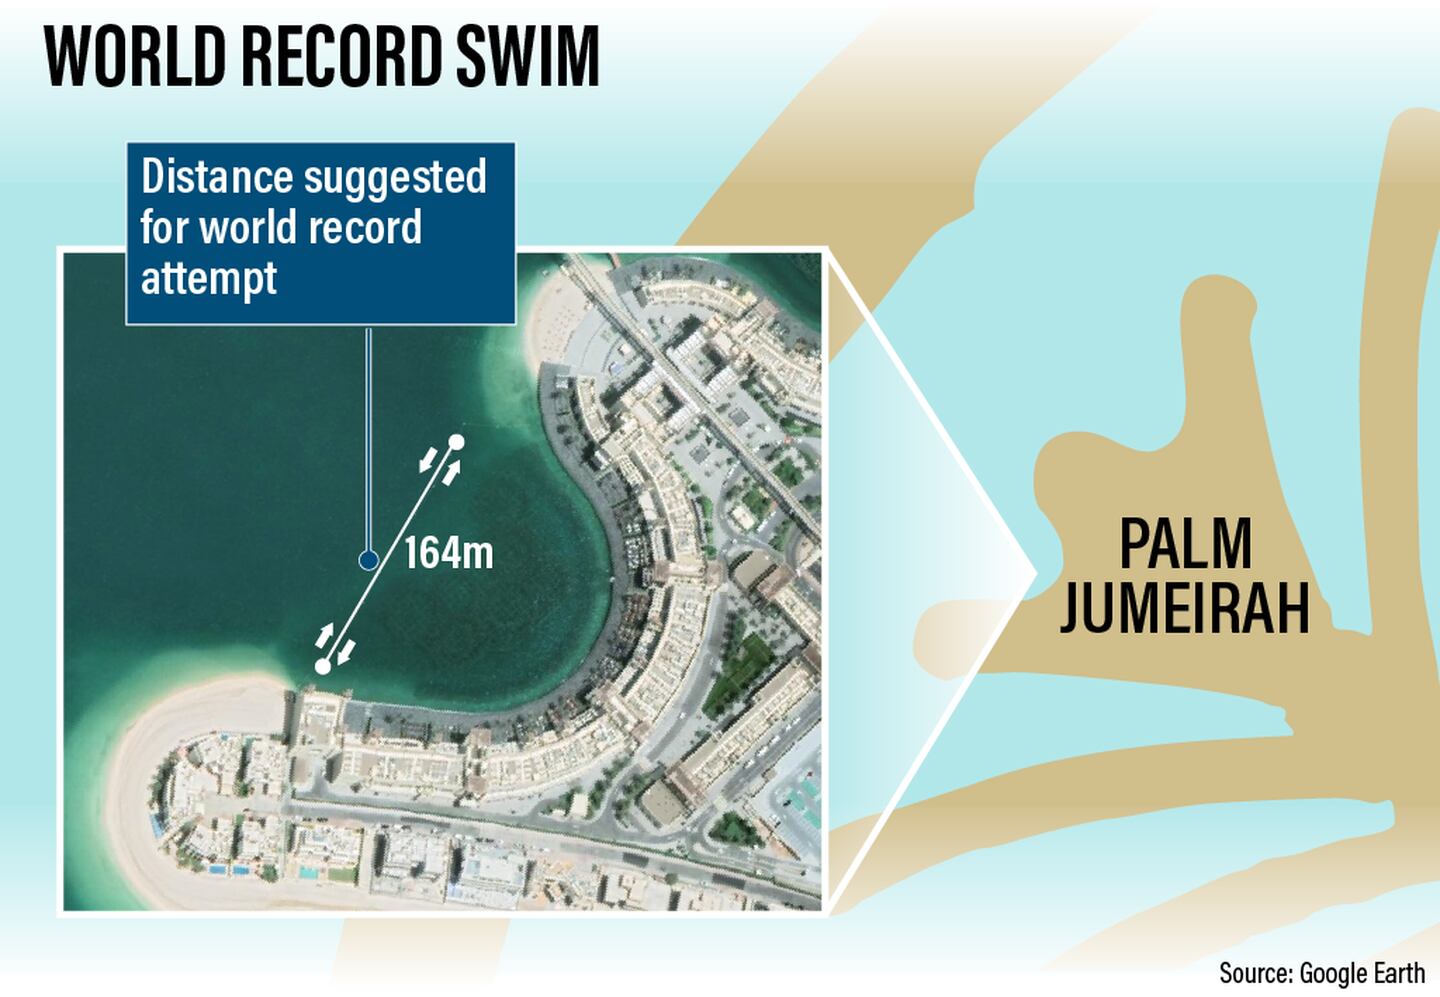 Shehab Allam swam back and forth along a 164-metre marked-out route.